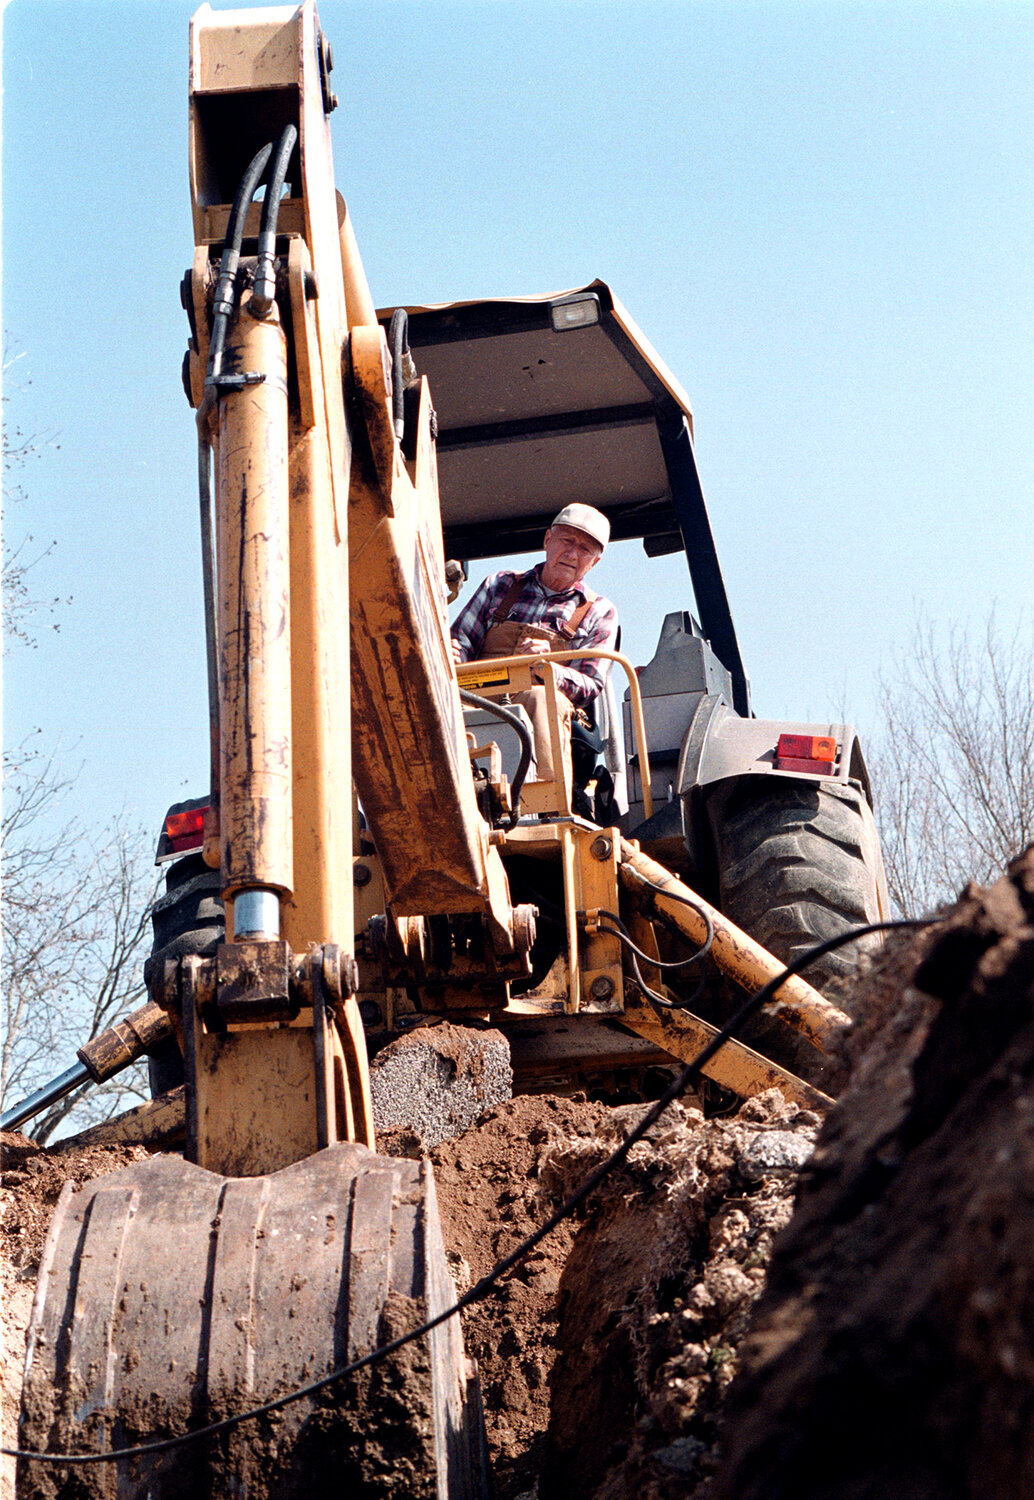 When Aledo United Methodist Church began the project of expanding its sanctuary, Pecan Street had to be re-routed. Church member Charlie McLane dug the trenches to move gas supply lines.